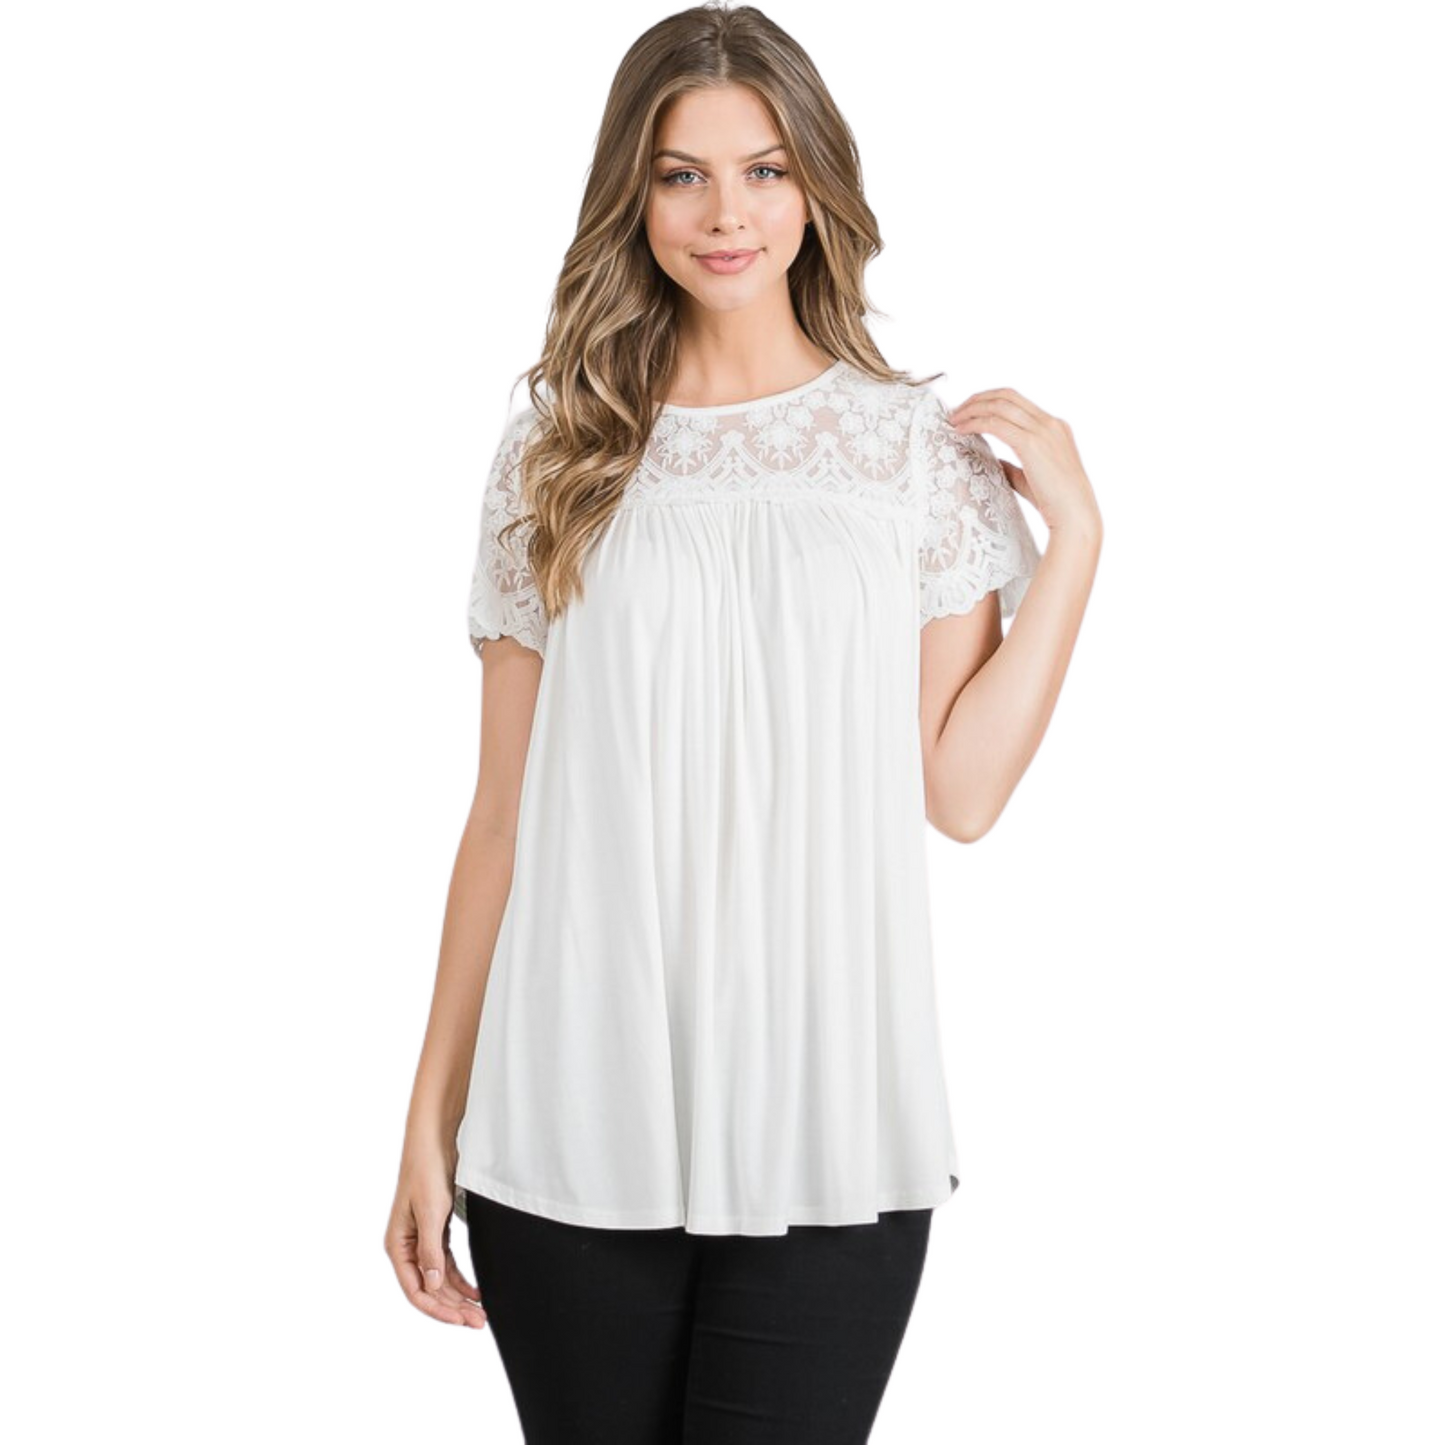 Enjoy the effortless elegance of our Crochet Lace Knit Top. Crafted with a lightweight knit fabric, this top features delicate lace detailing, perfect for the warmer months. In the timeless shade of white, this piece is sophisticated and classic.